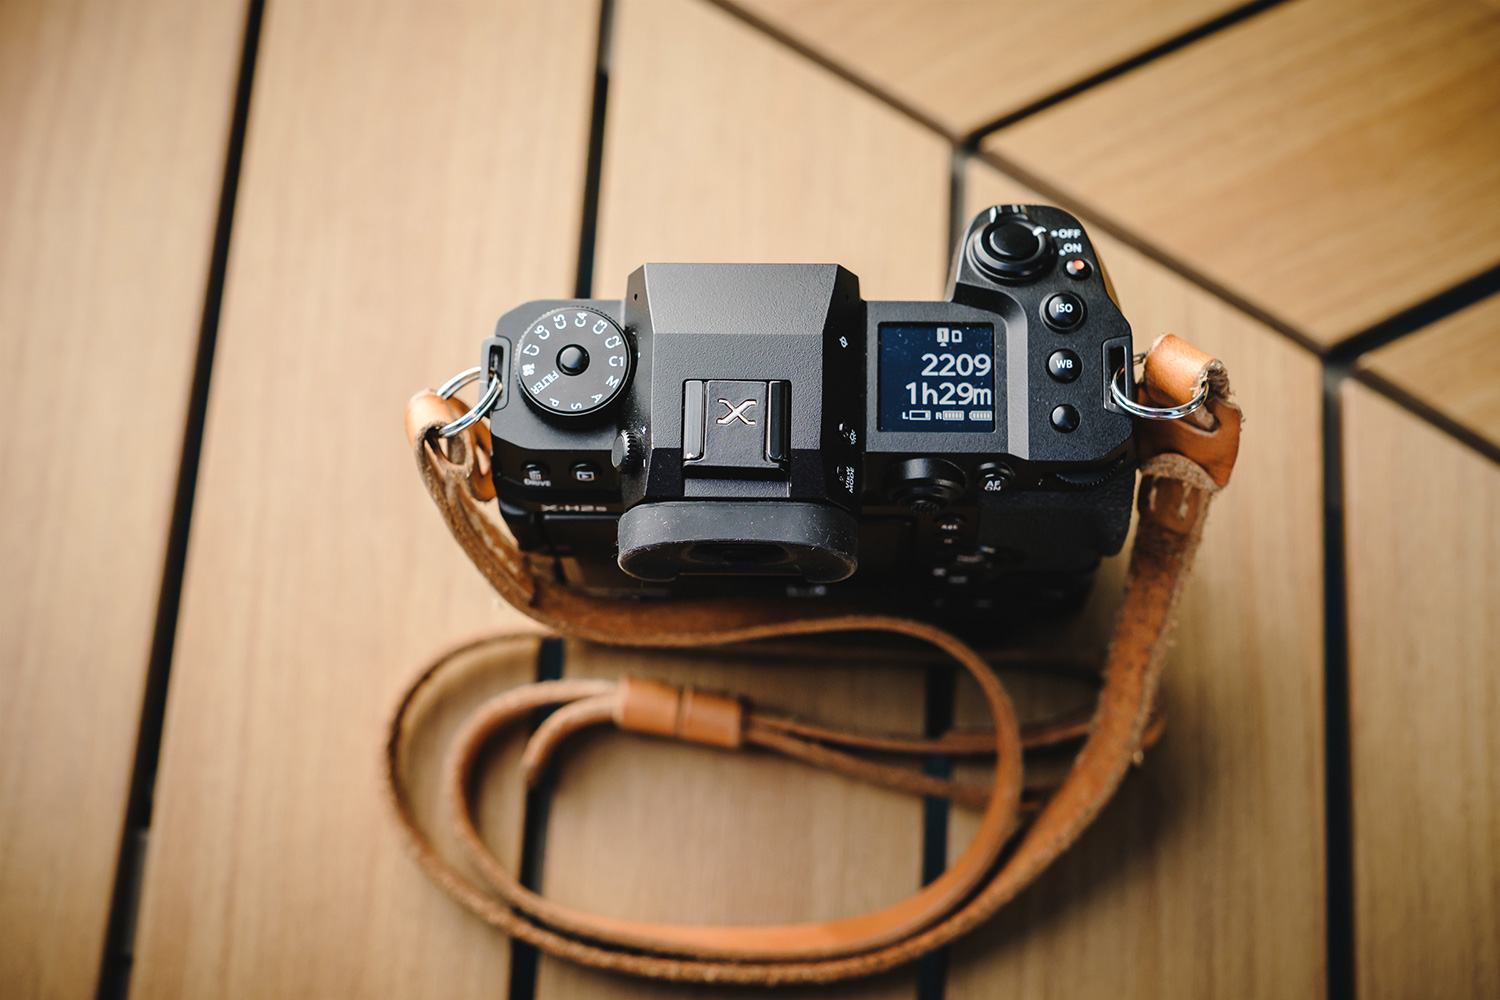 Premium/ Three months with the Fujifilm X-H2S – A photographic review